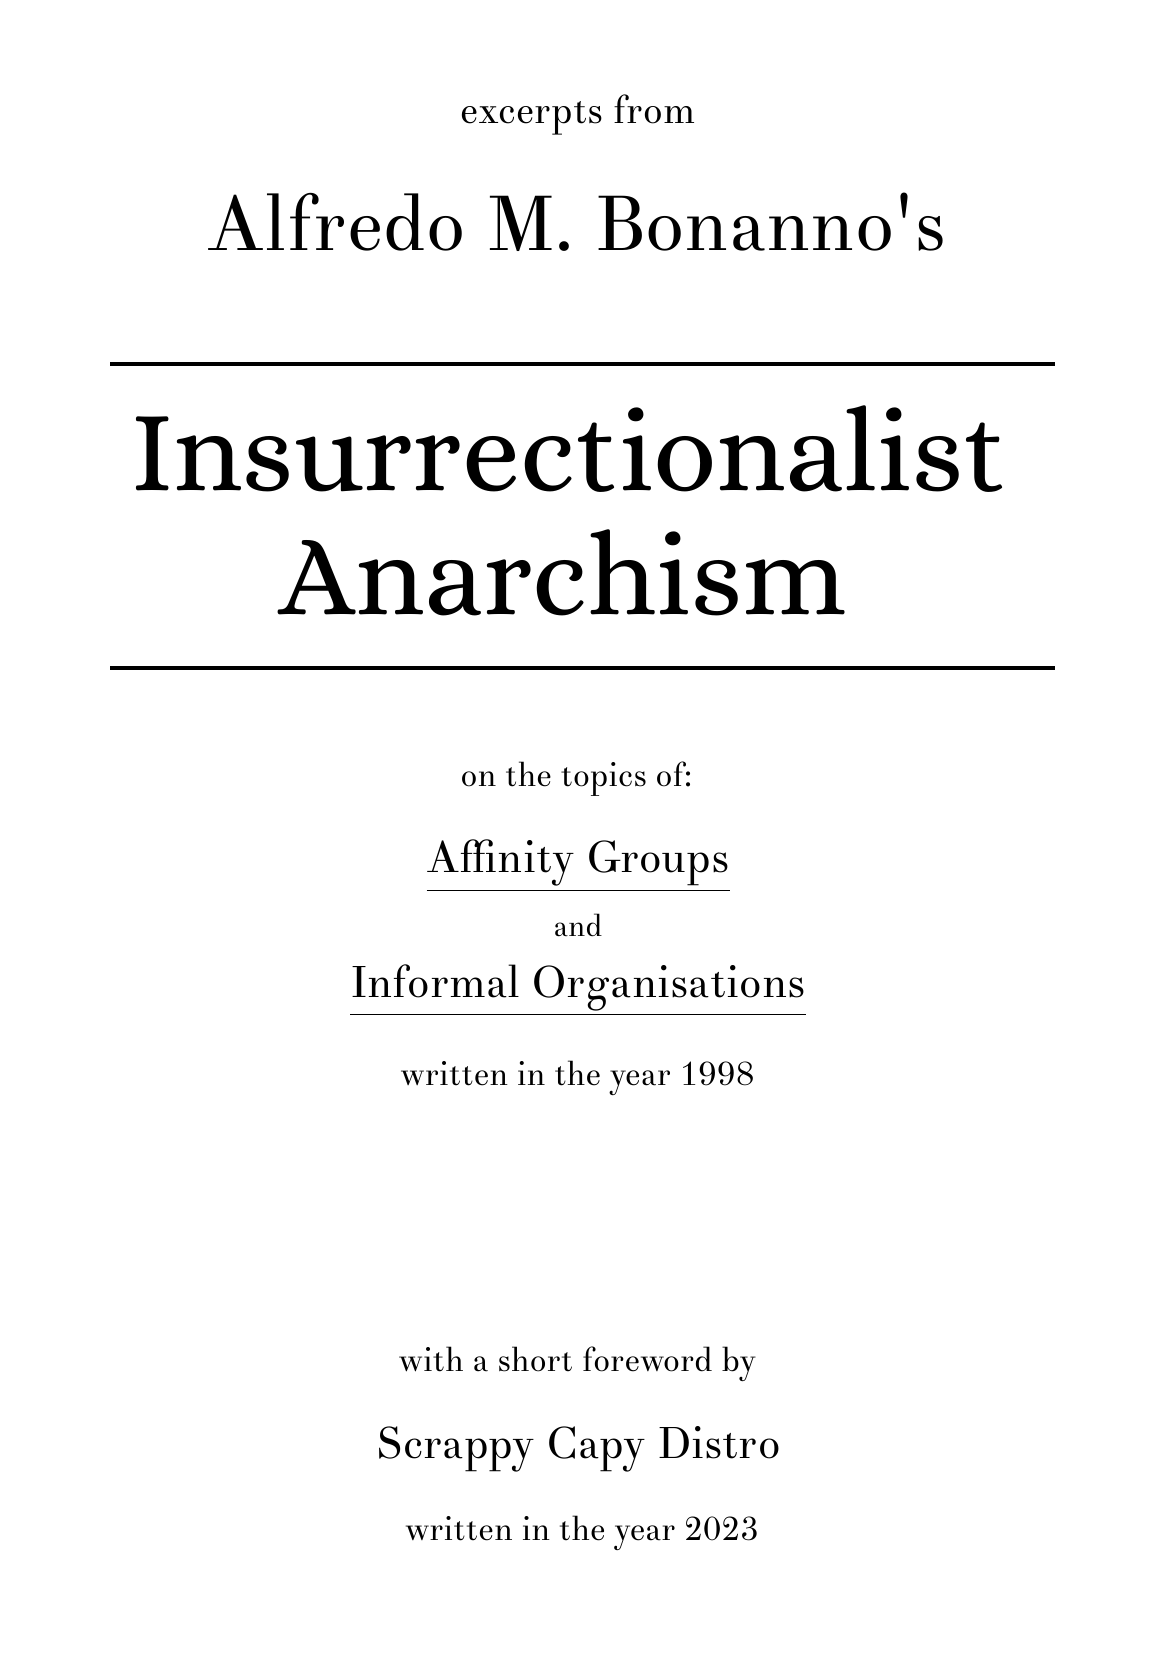 Excerpts from Insurrectionalist Anarchism